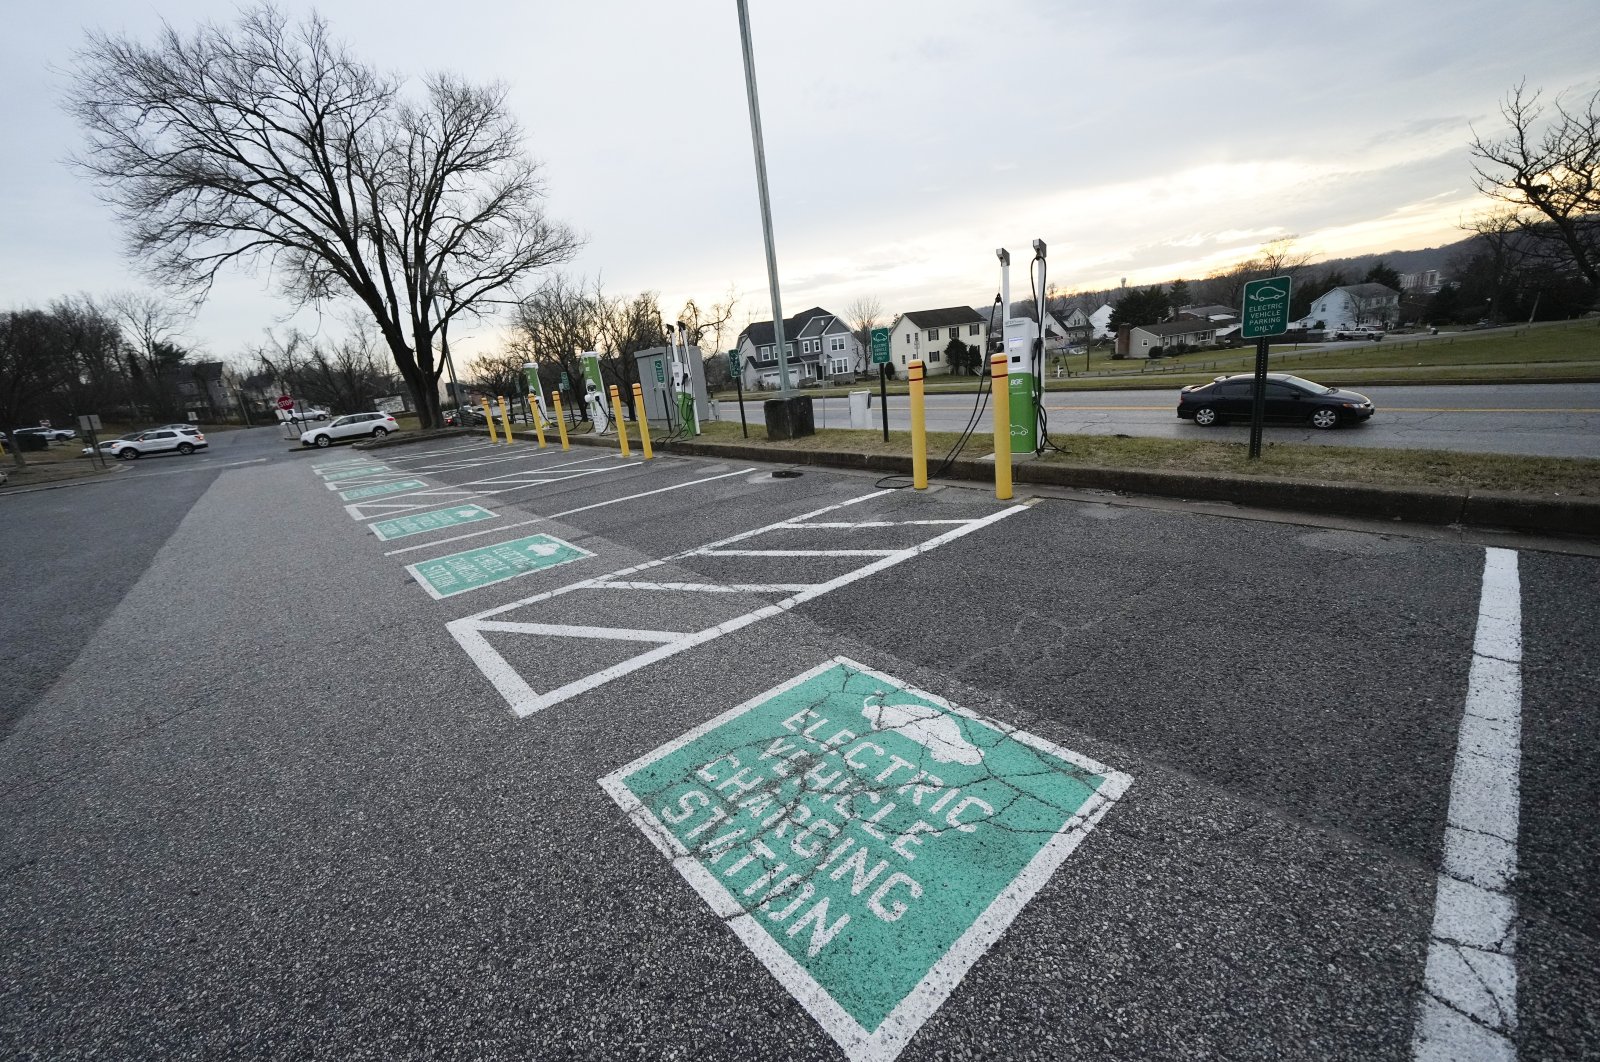 Chargers are seen near parking stalls dedicated for electric vehicles outside of the Cockeysville Public Library in Cockeysville, Maryland, U.S., Jan. 3, 2023. (AP Photo)